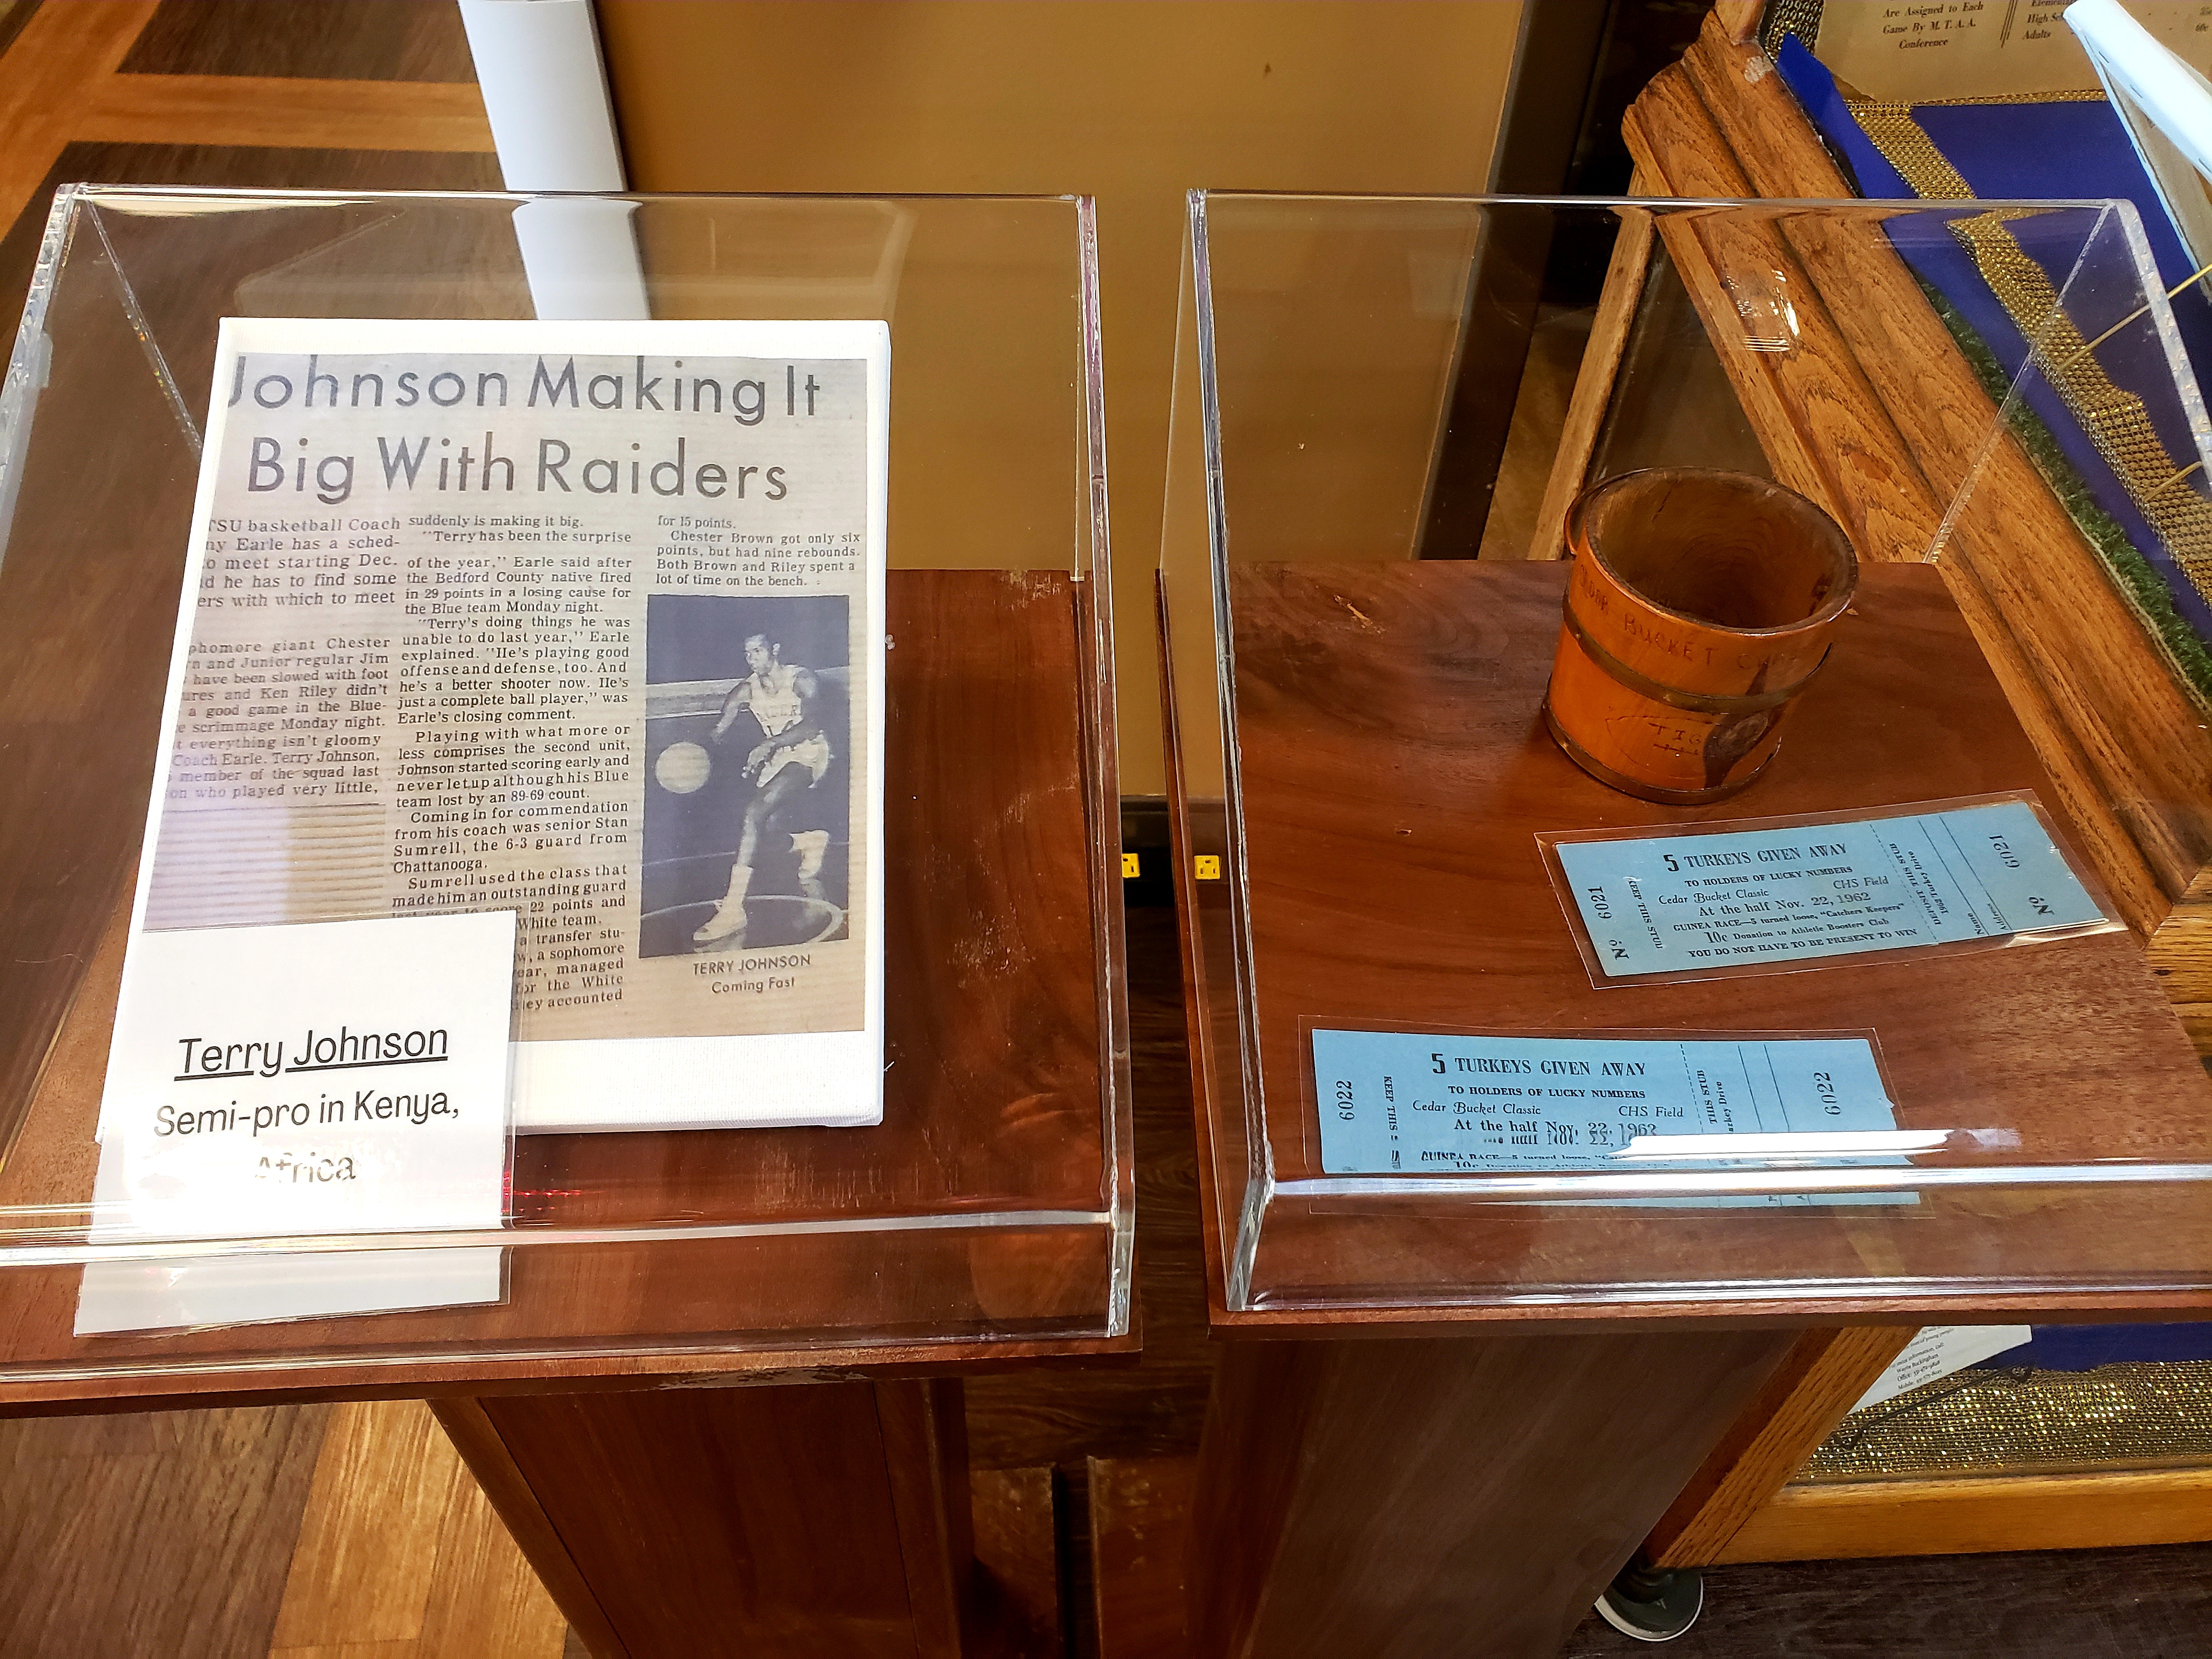 Left: Article covering Terry Johnson, who went on to play semi-pro basketball in Kenya. Right: The cedar bucket was used as the symbol for an annual football game between Bedford County Training School and Holloway High School in Murfreesboro.